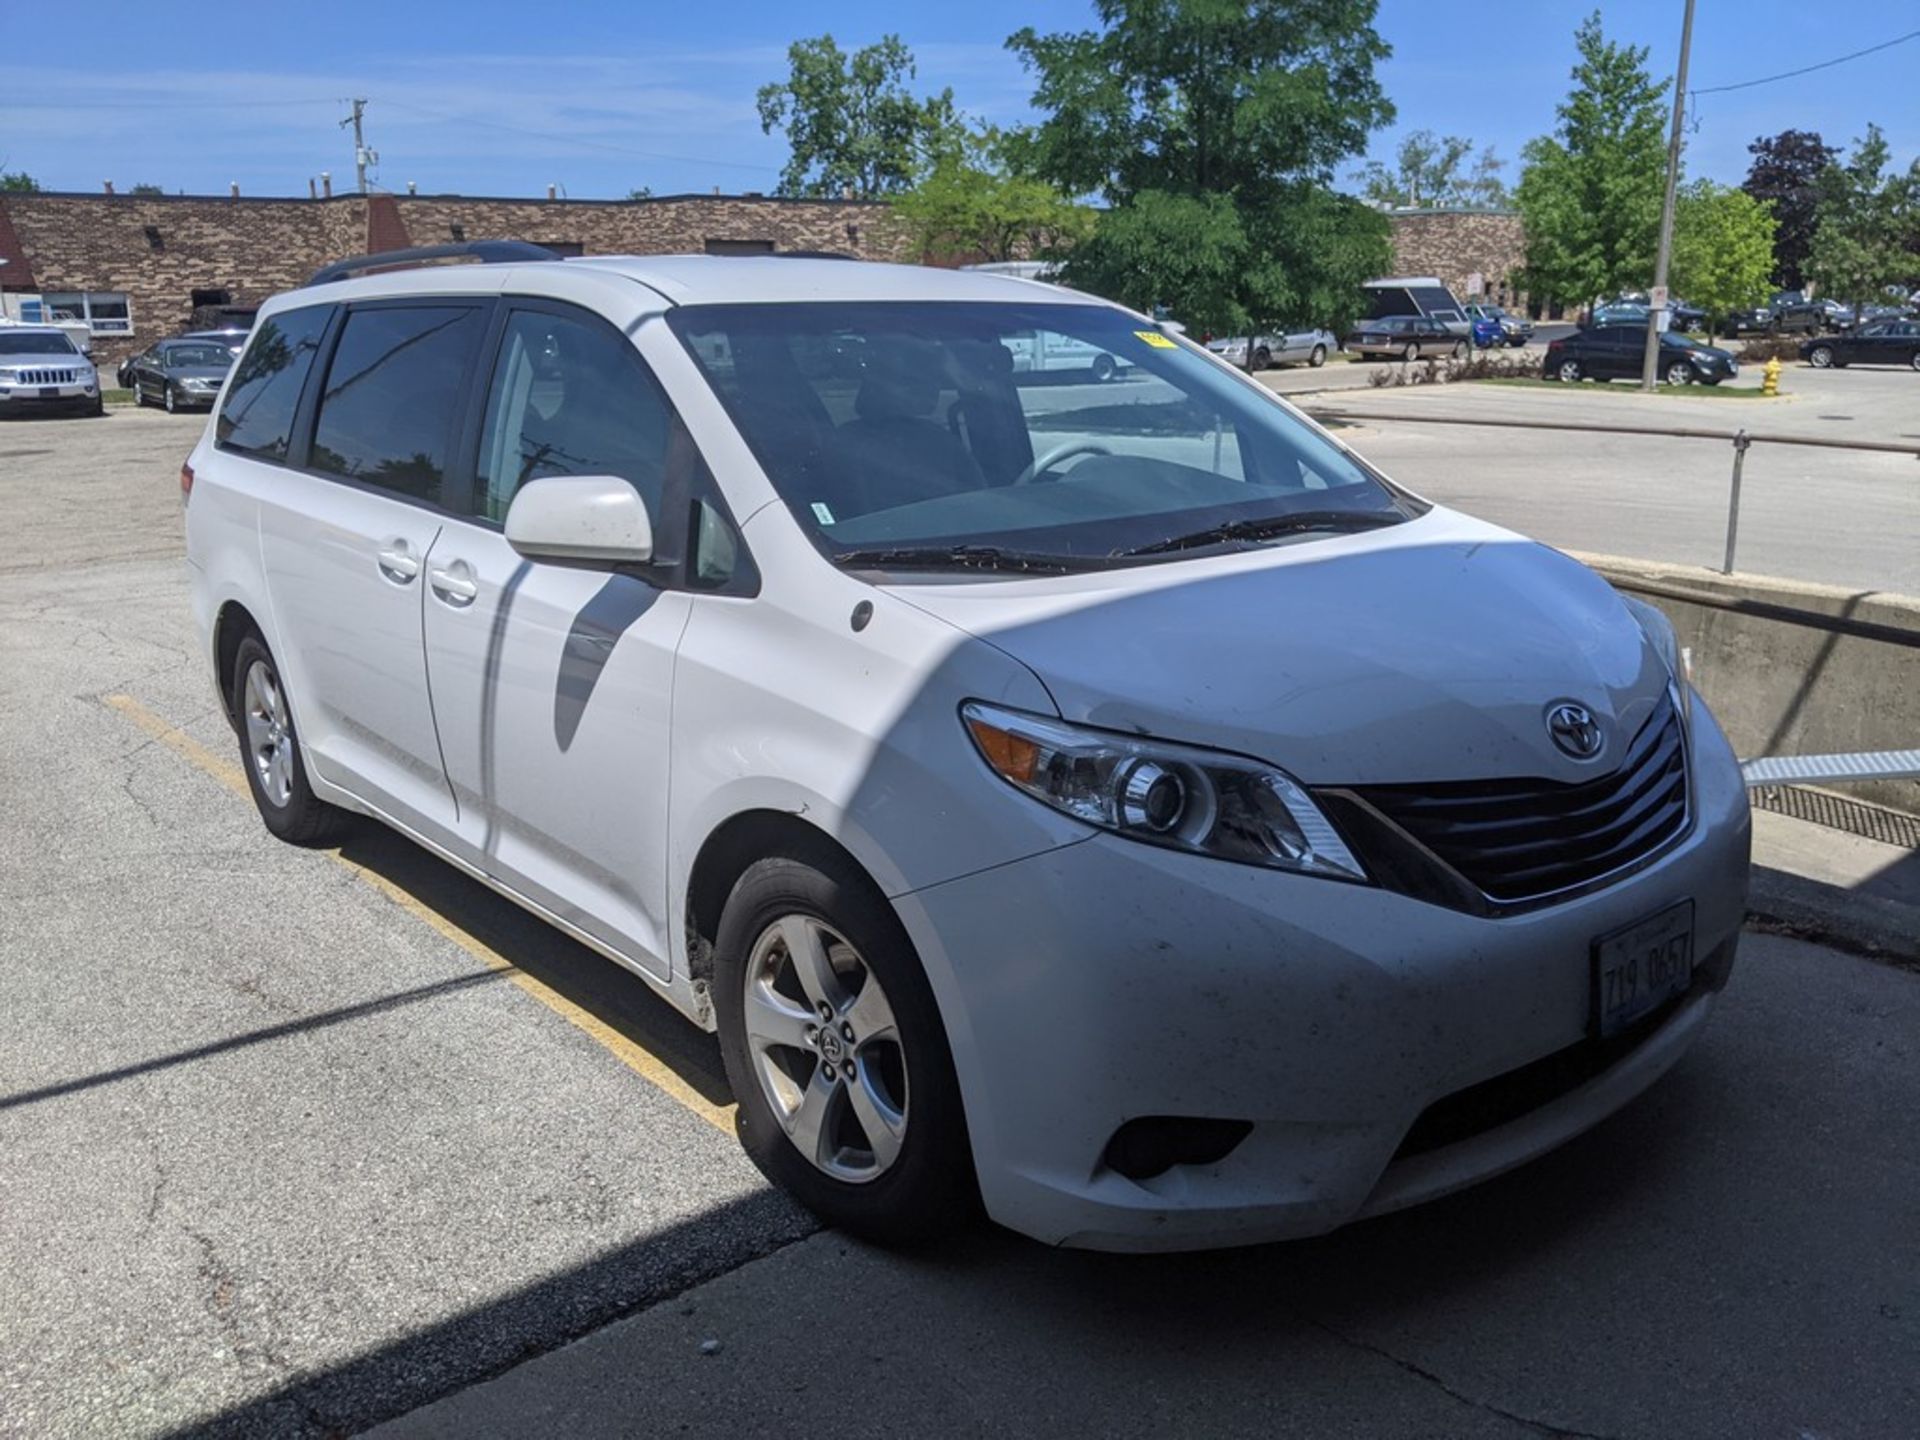 2014 TOYOTA MODEL SIENNA LE VAN, VIN: 5TDKK3DCXES482912, AUTOMATIC TRANSMISSION, APPROX. 240,000 - Image 6 of 14